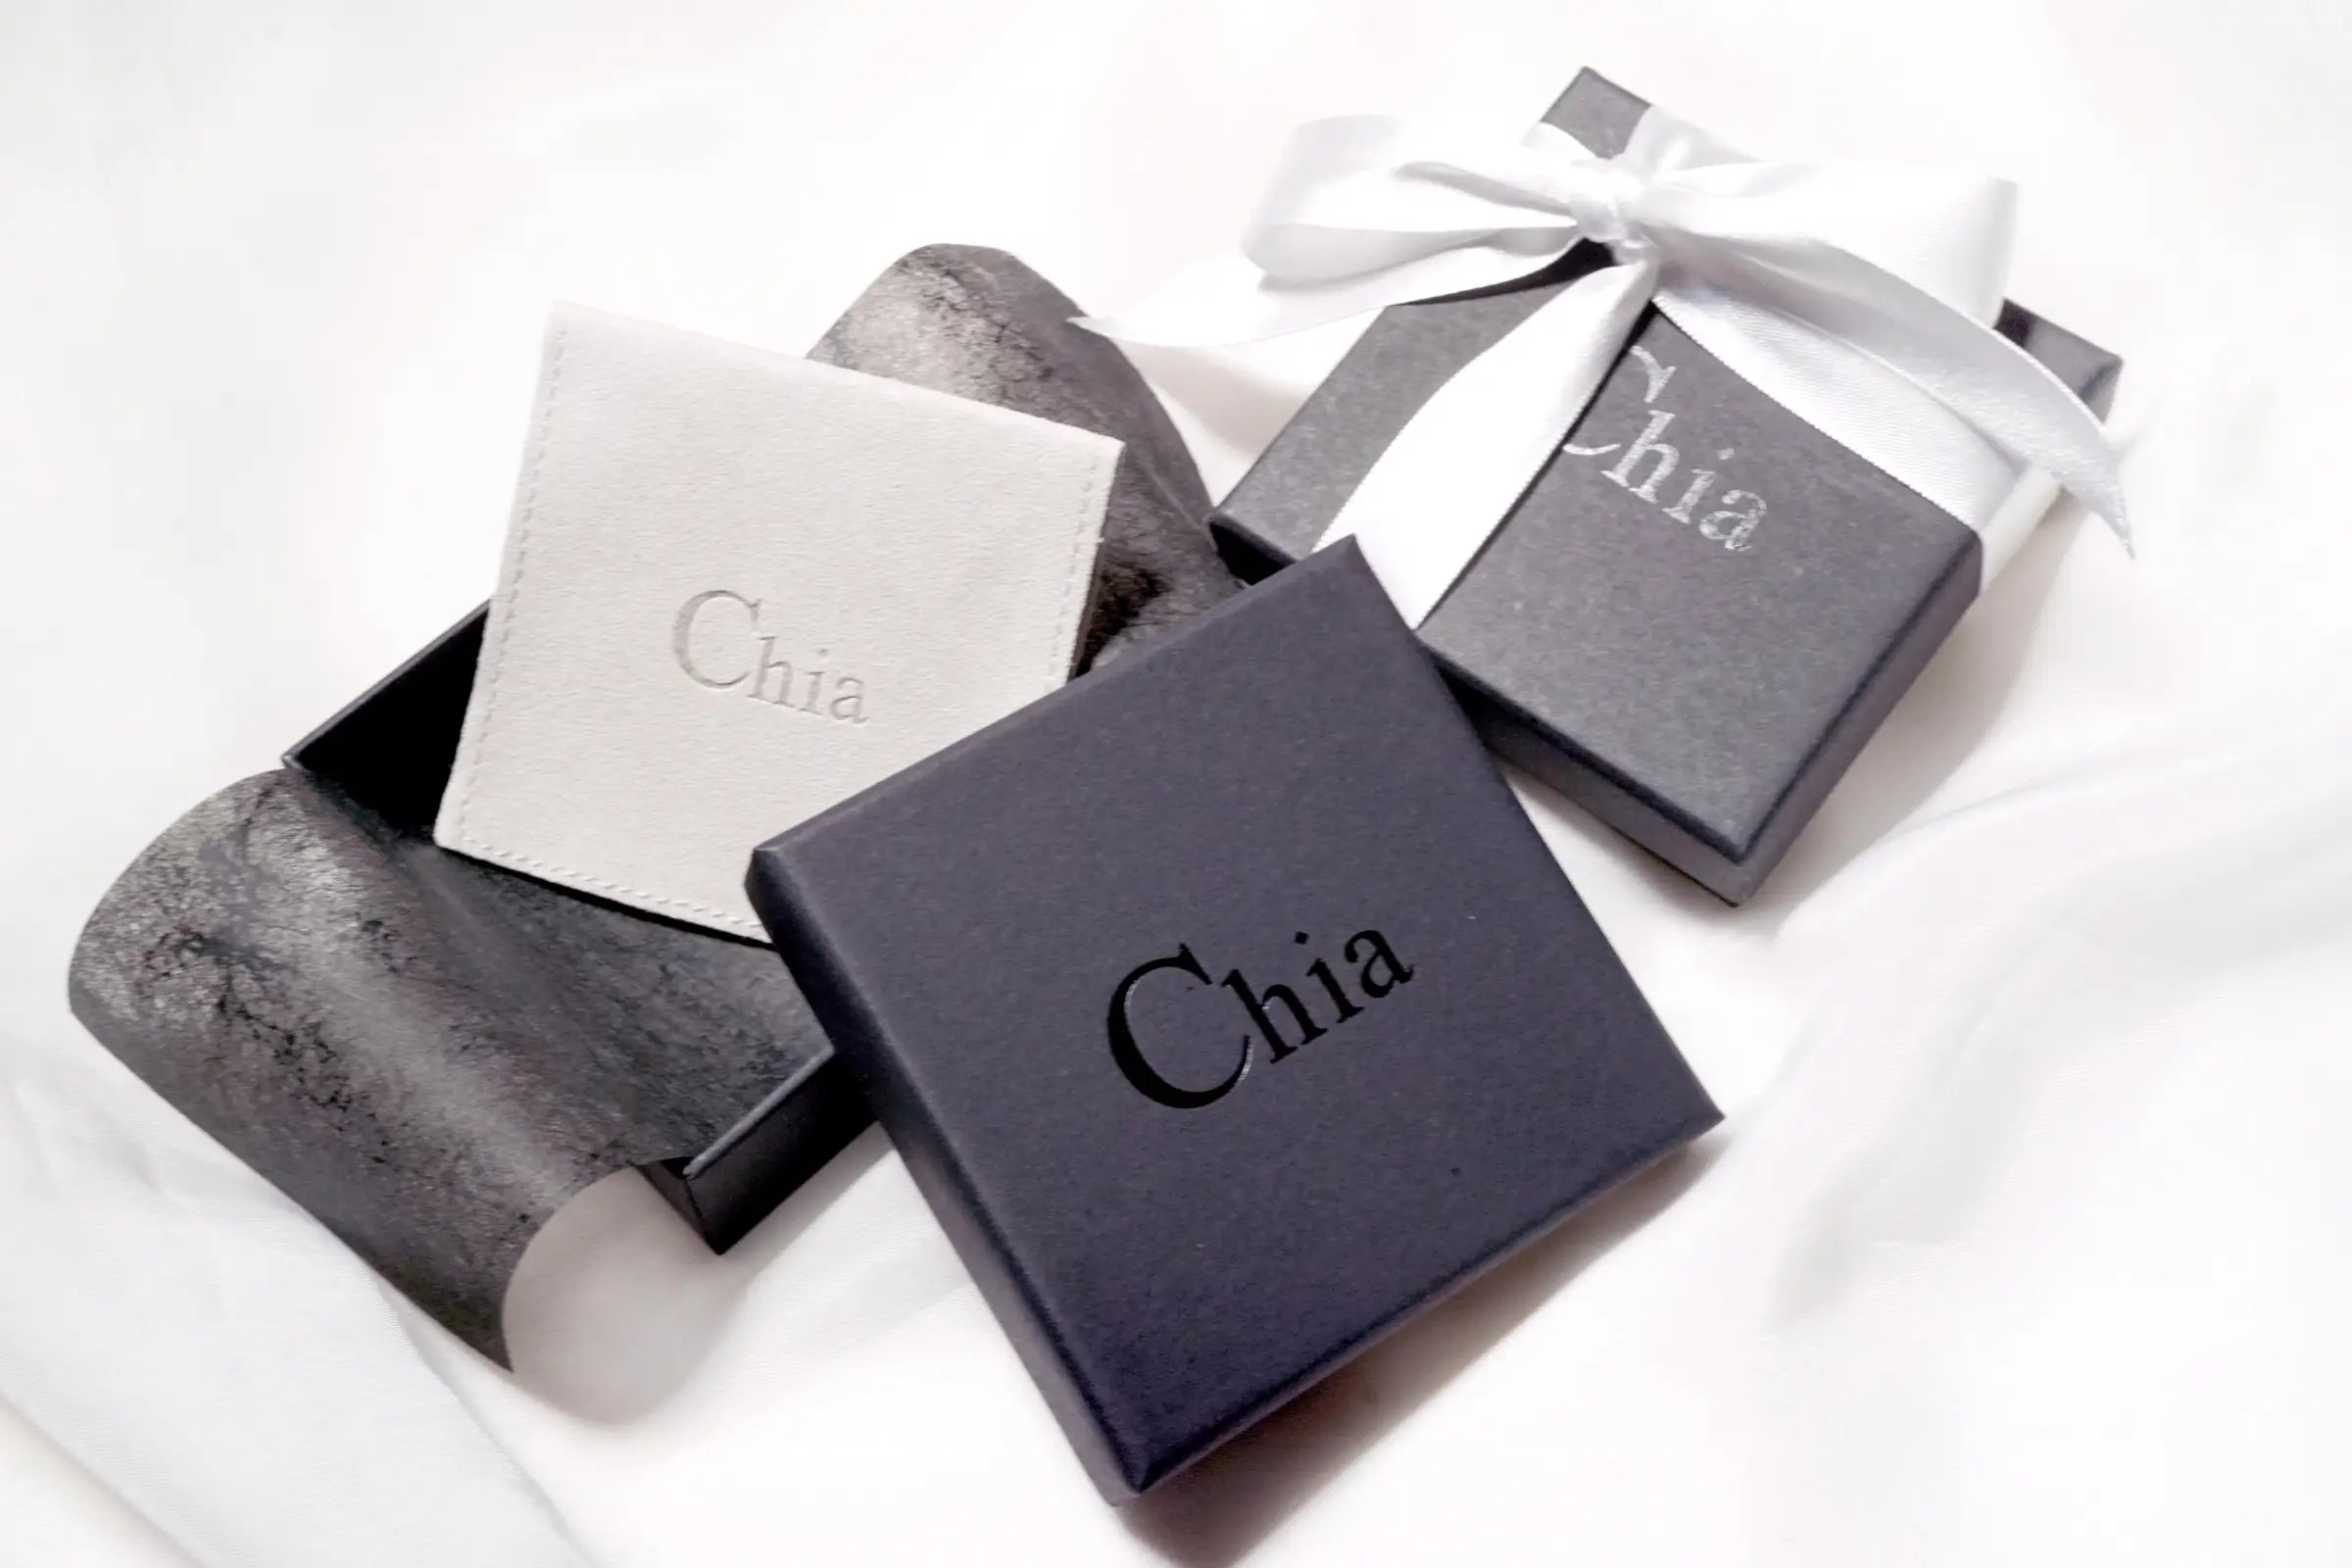 Chia Jewelry luxury packaging box and pouch. Best gift ideas every type of best friend.